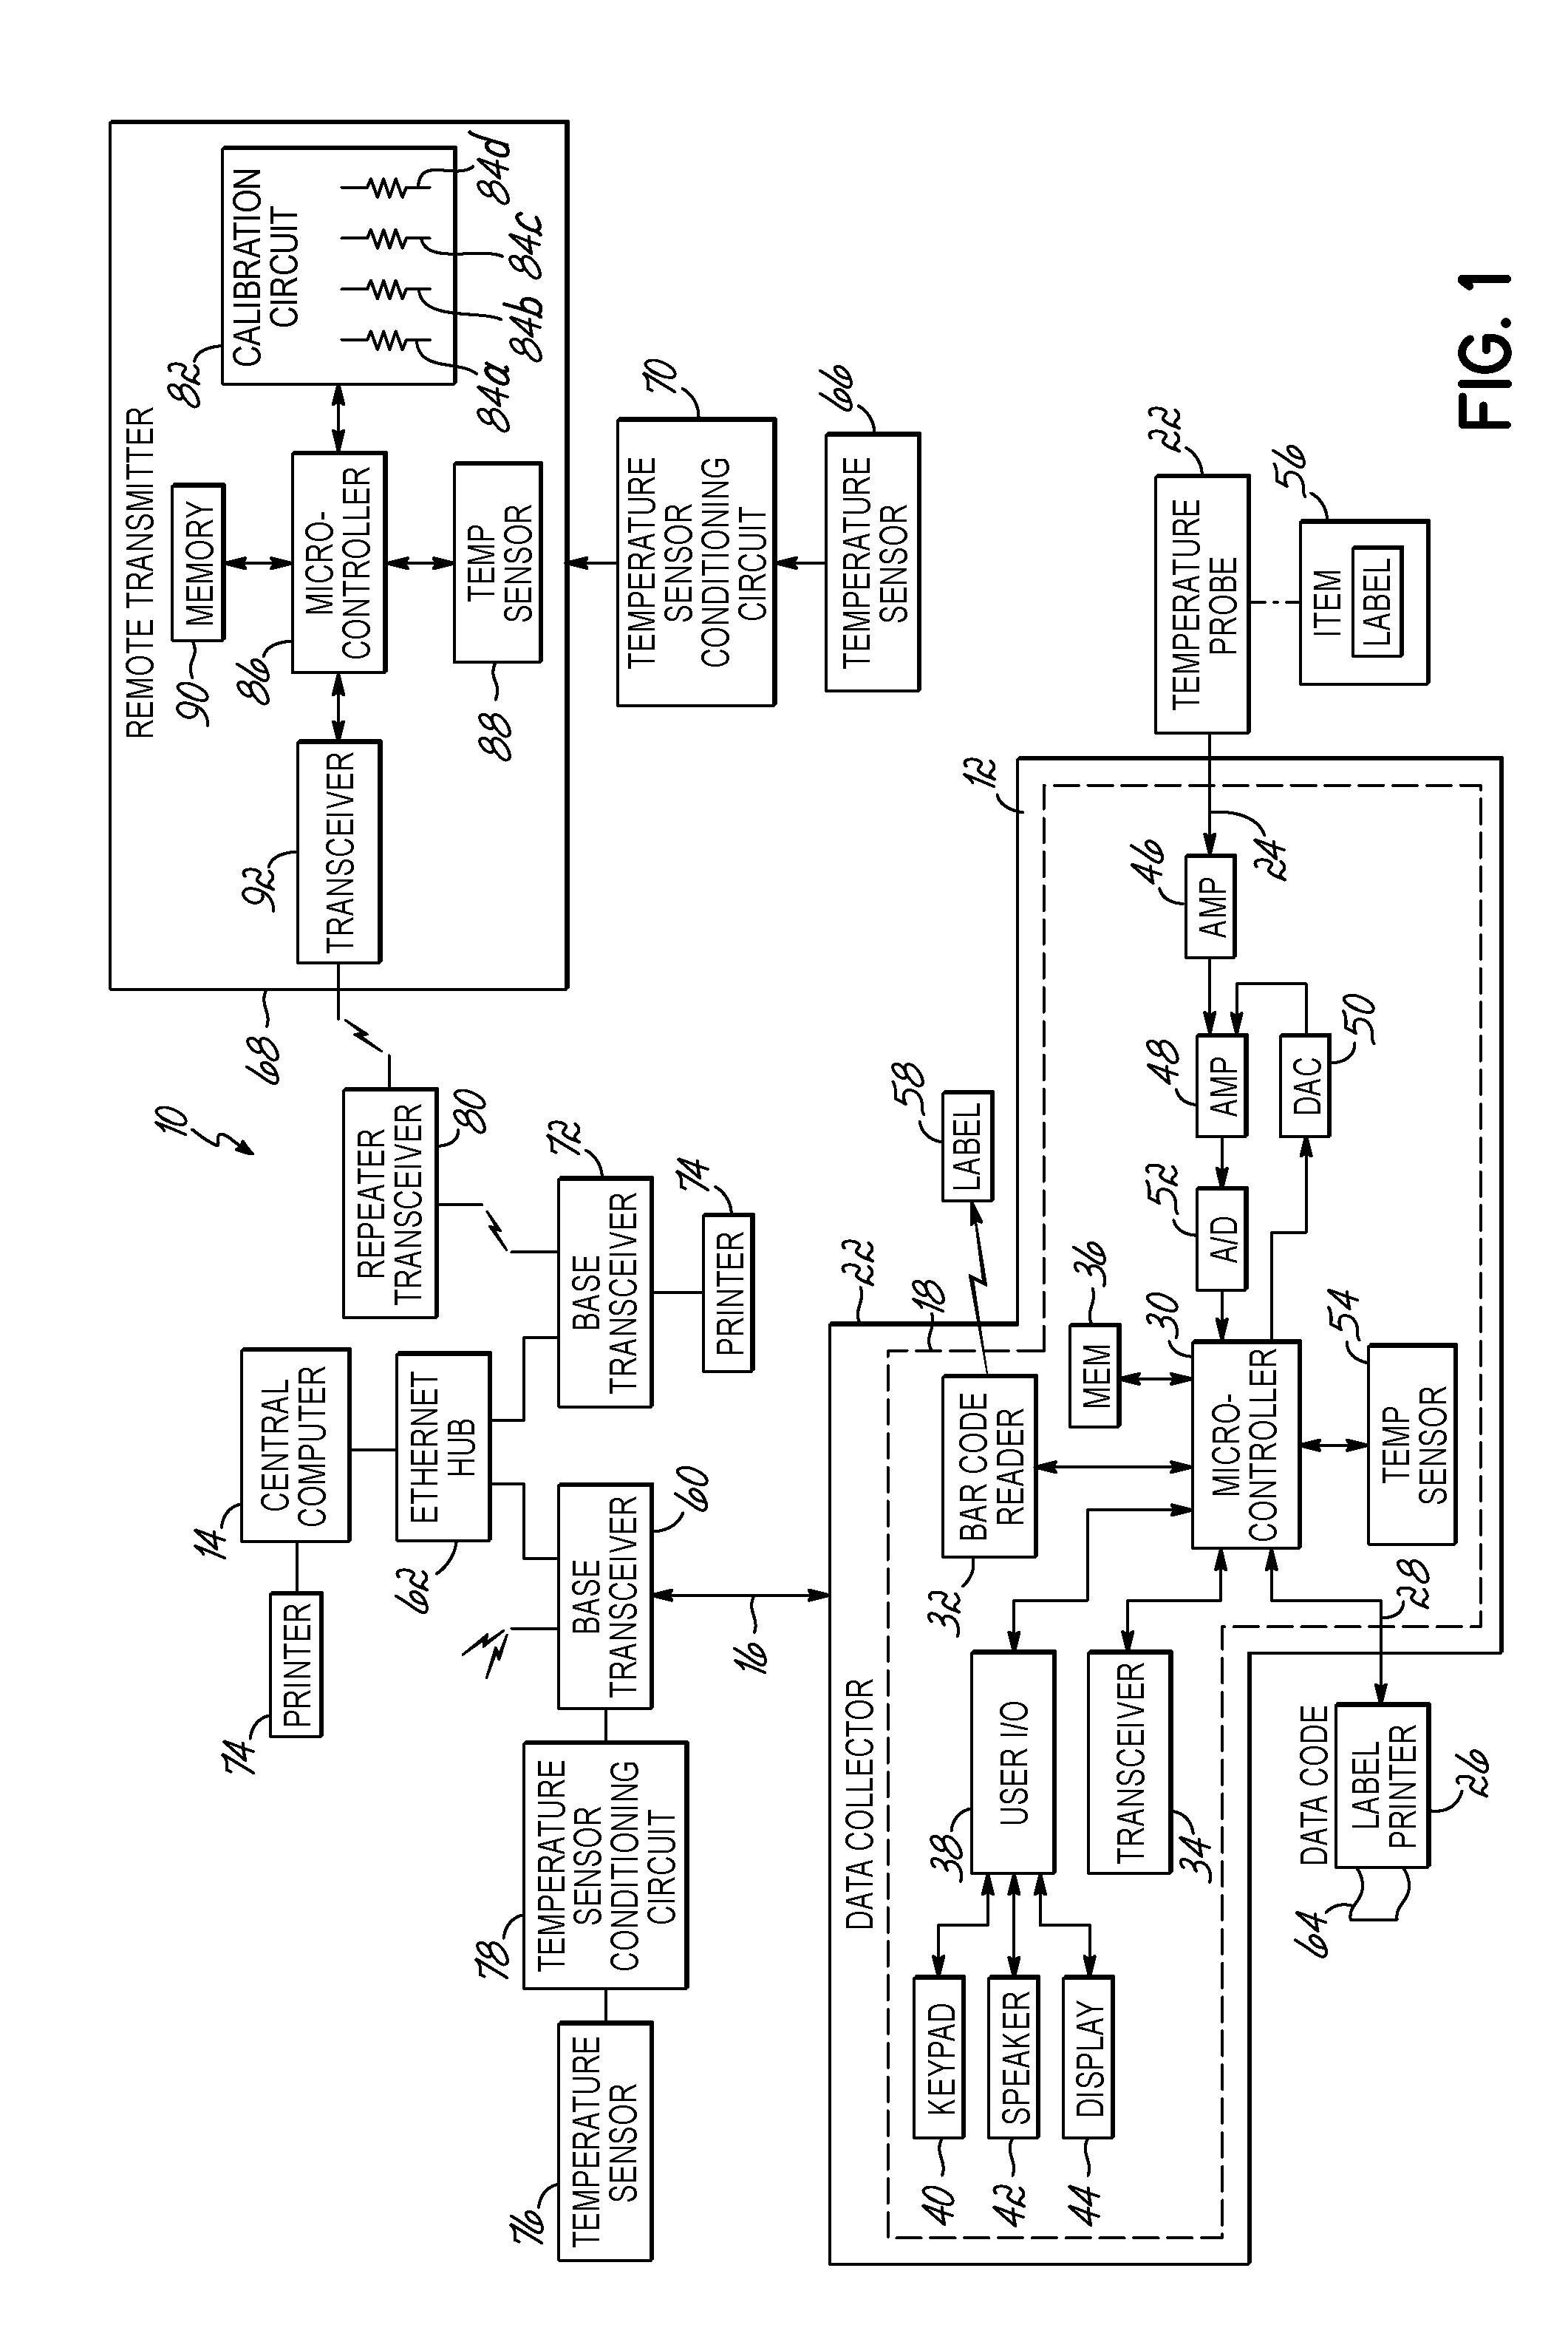 Wireless temperature probe calibration system and method